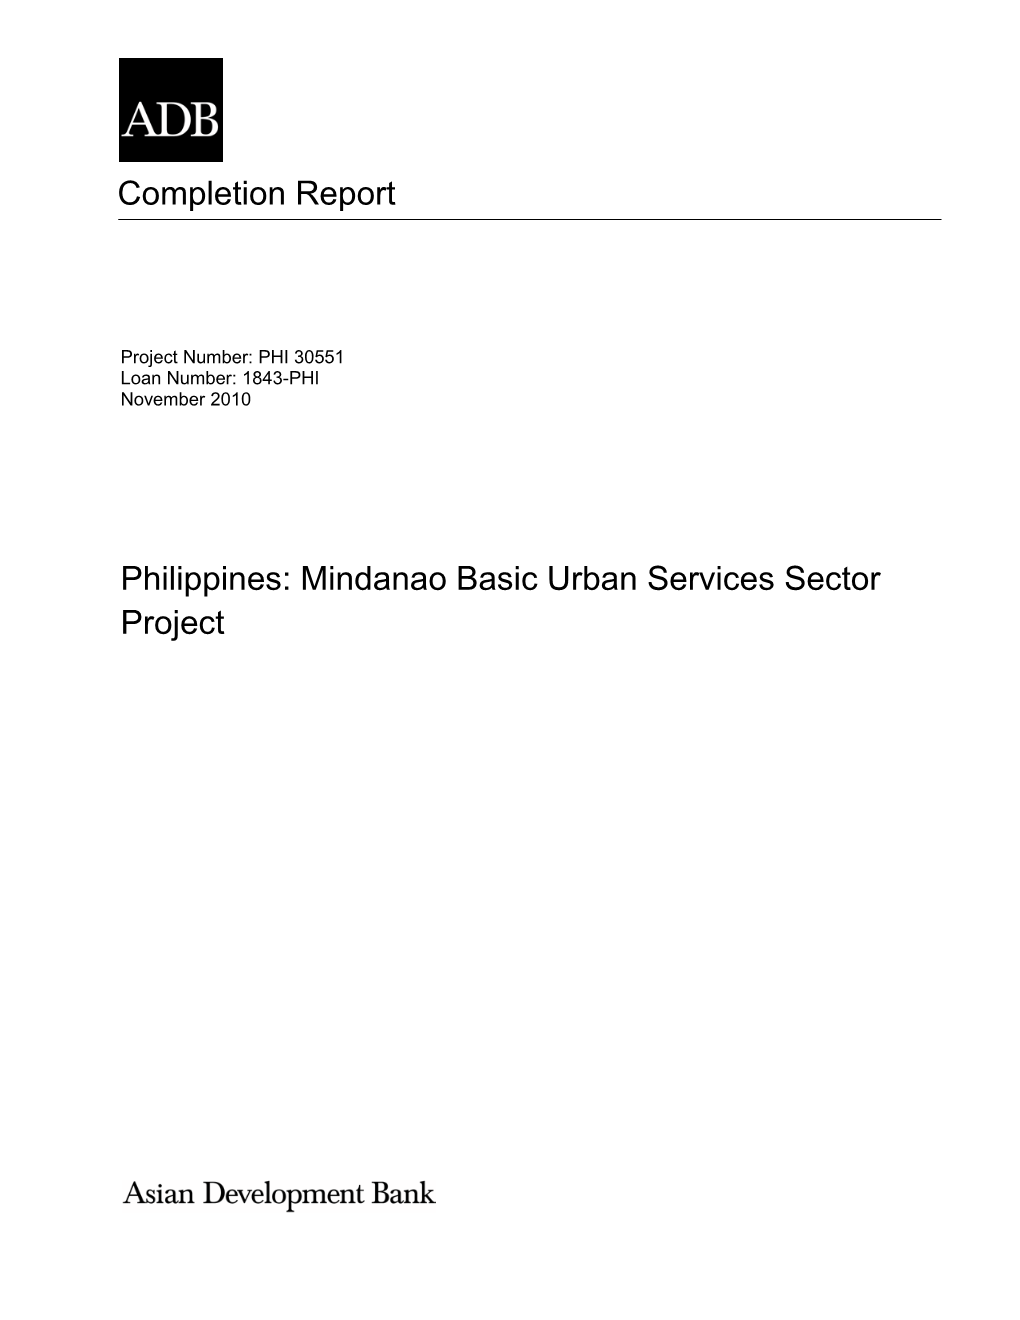 Mindanao Basic Urban Services Sector Project